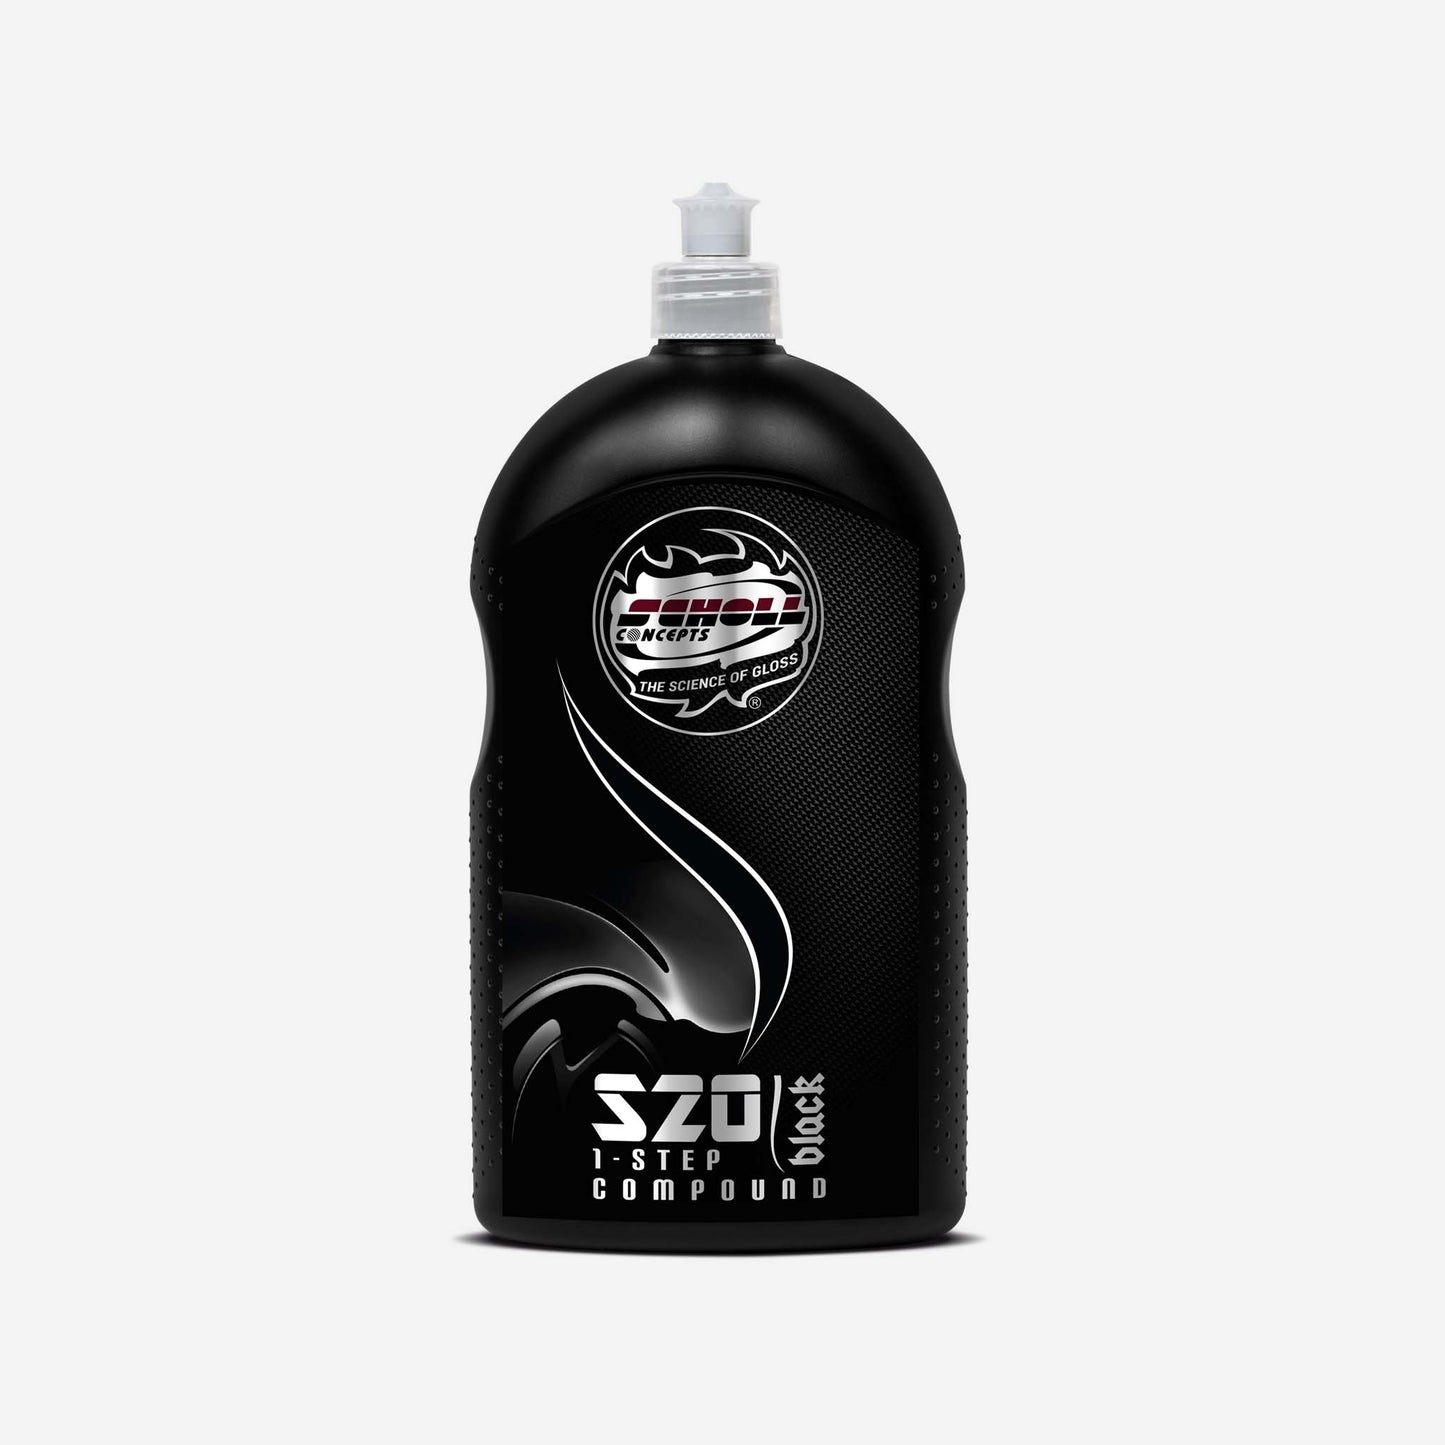 S20 BLACK Real 1-Step Compound